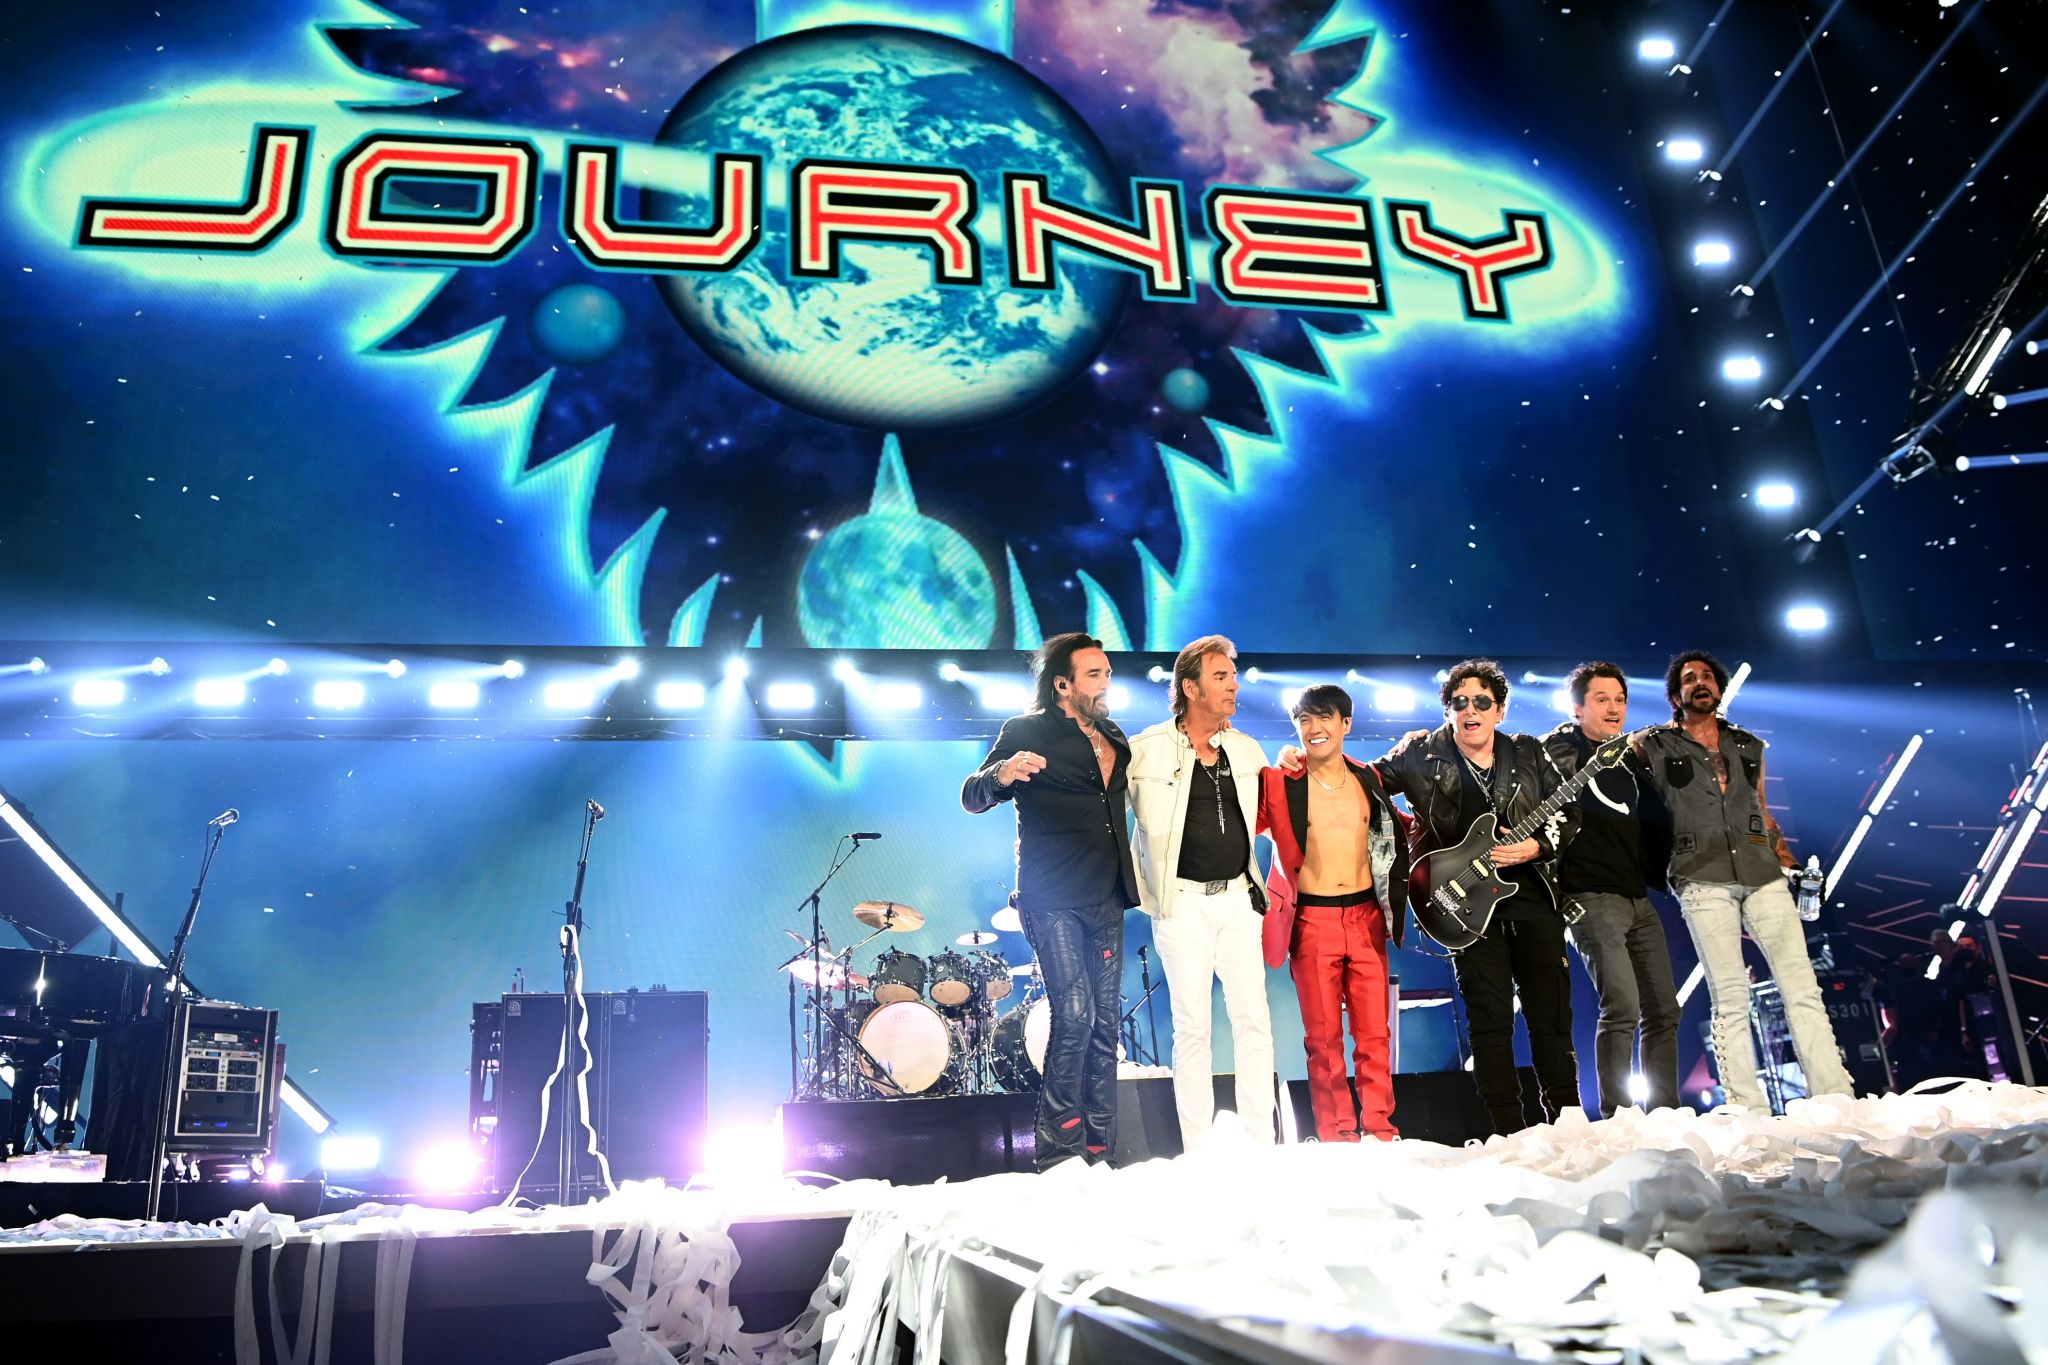 Journey Concert Schedule 2022 Journey, Toto Heading To Ct For 2022 'Freedom Tour'